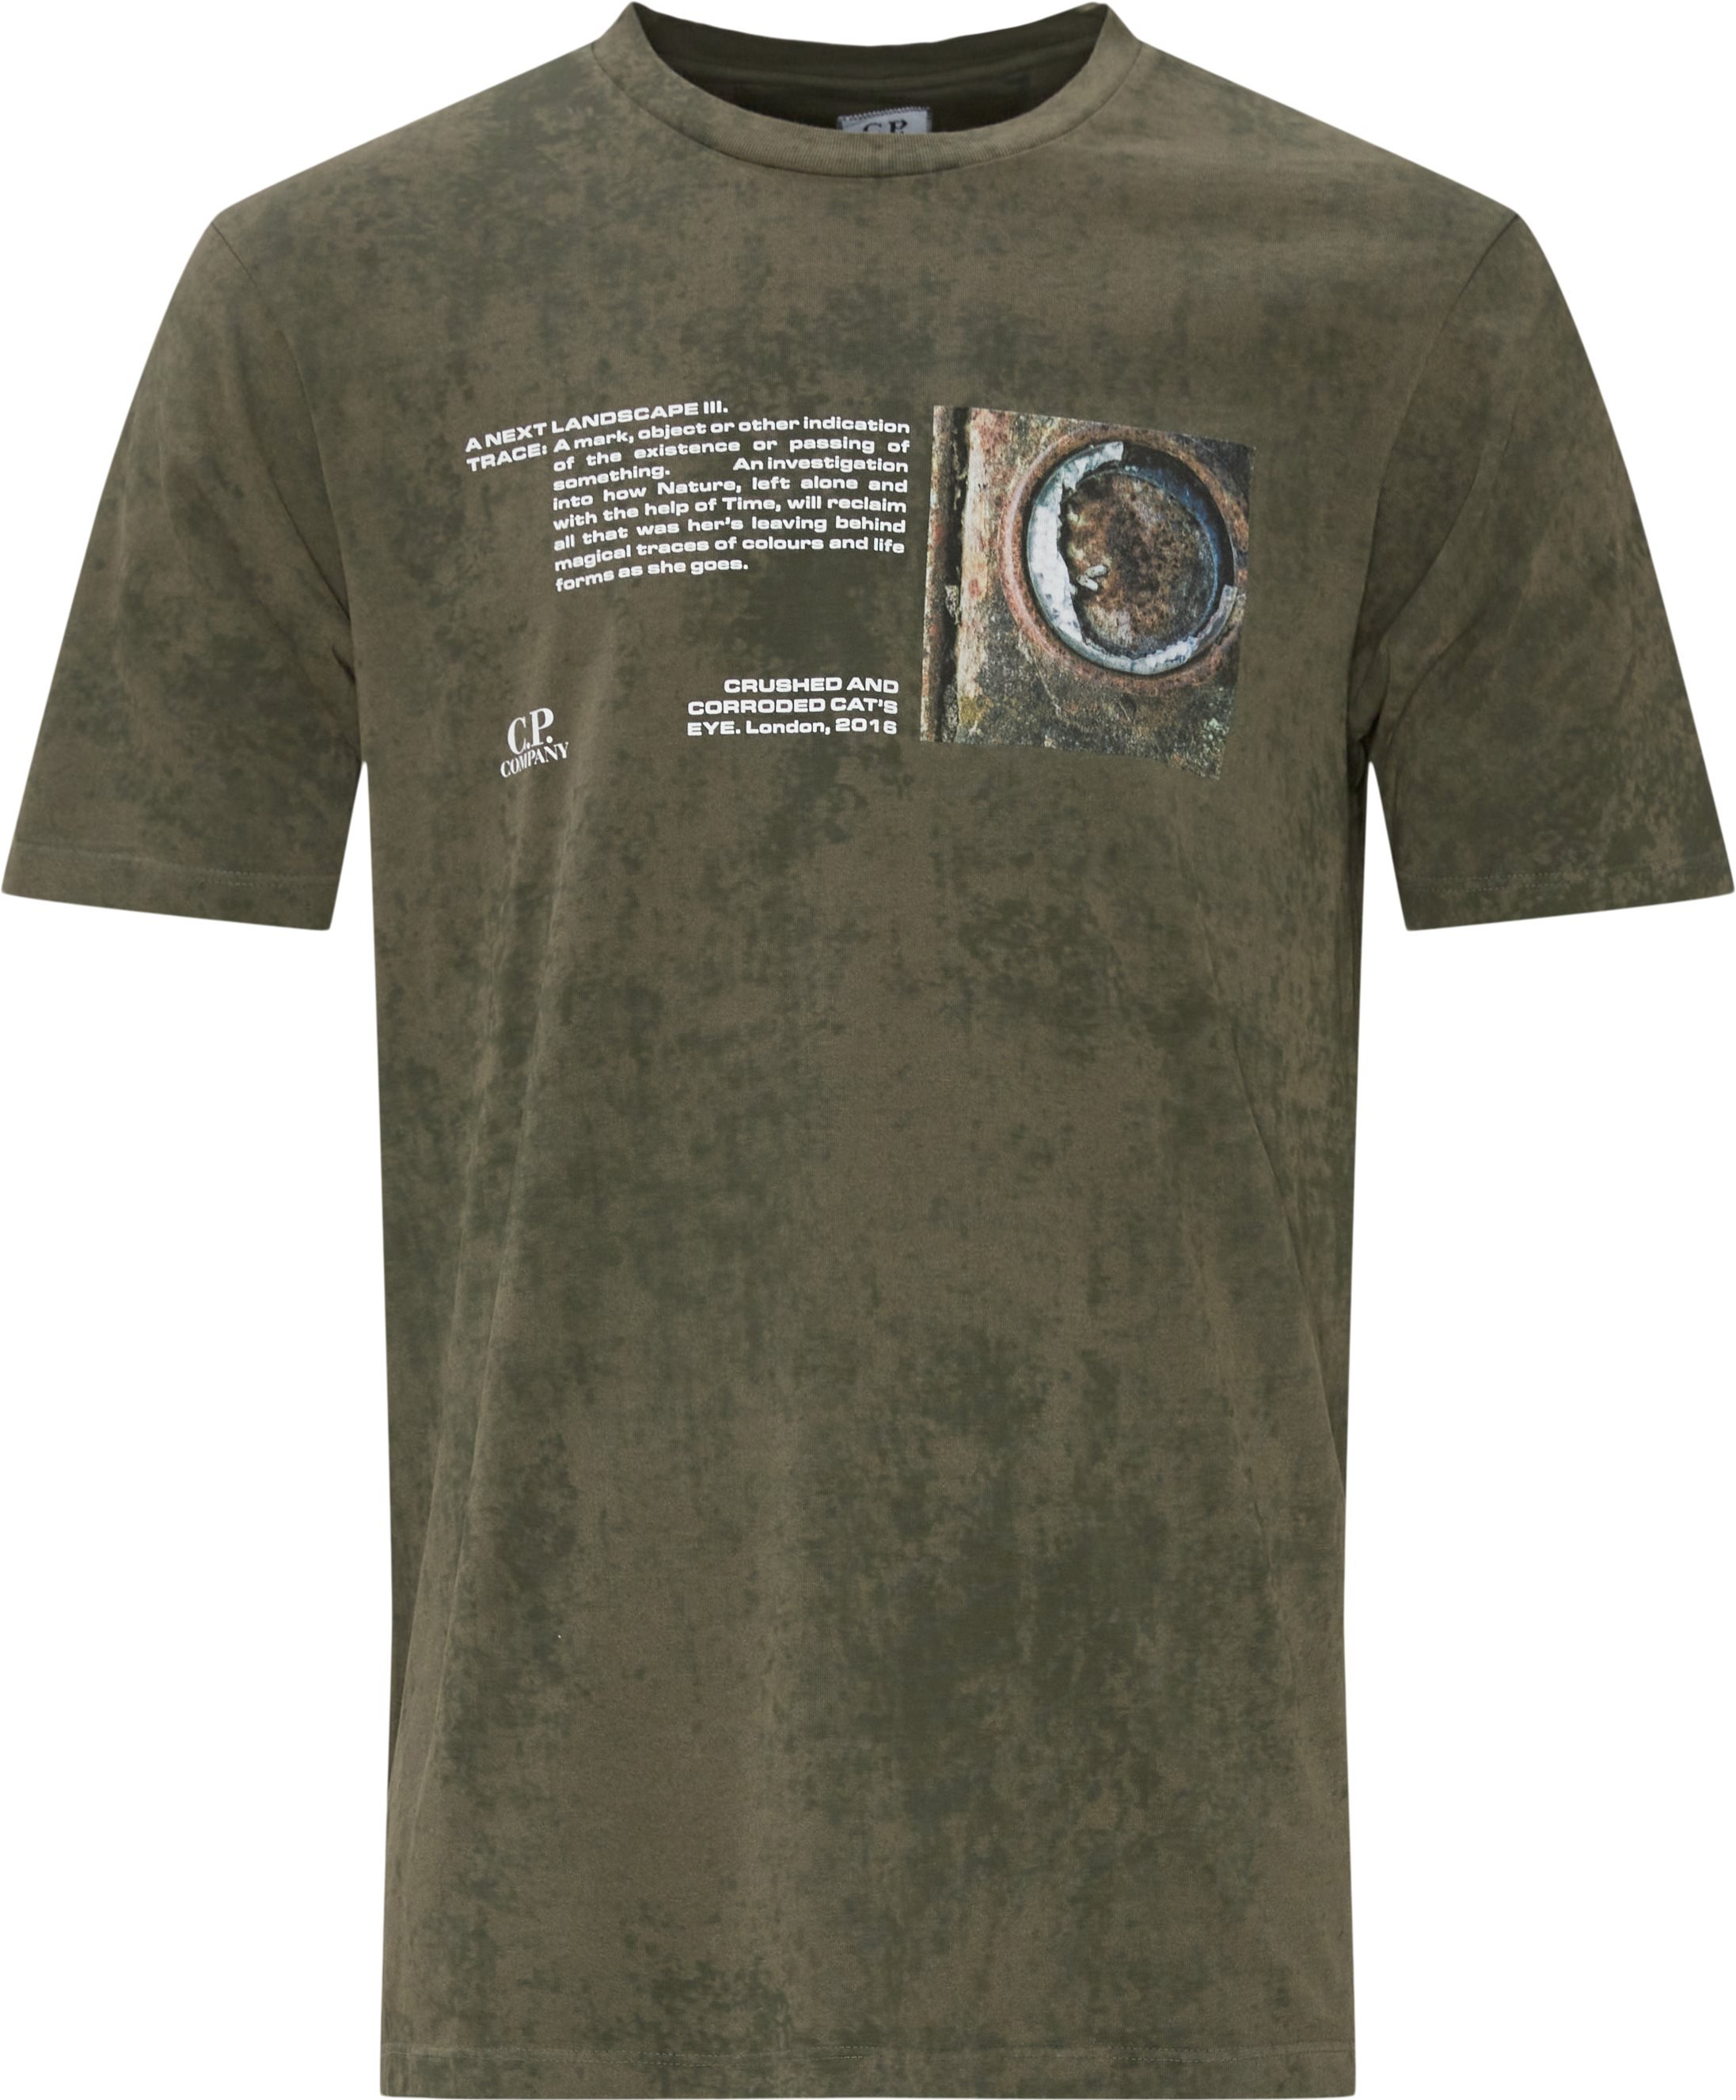 Treated Next Landscape Jersey 24/1 T-shirt - T-shirts - Regular fit - Army